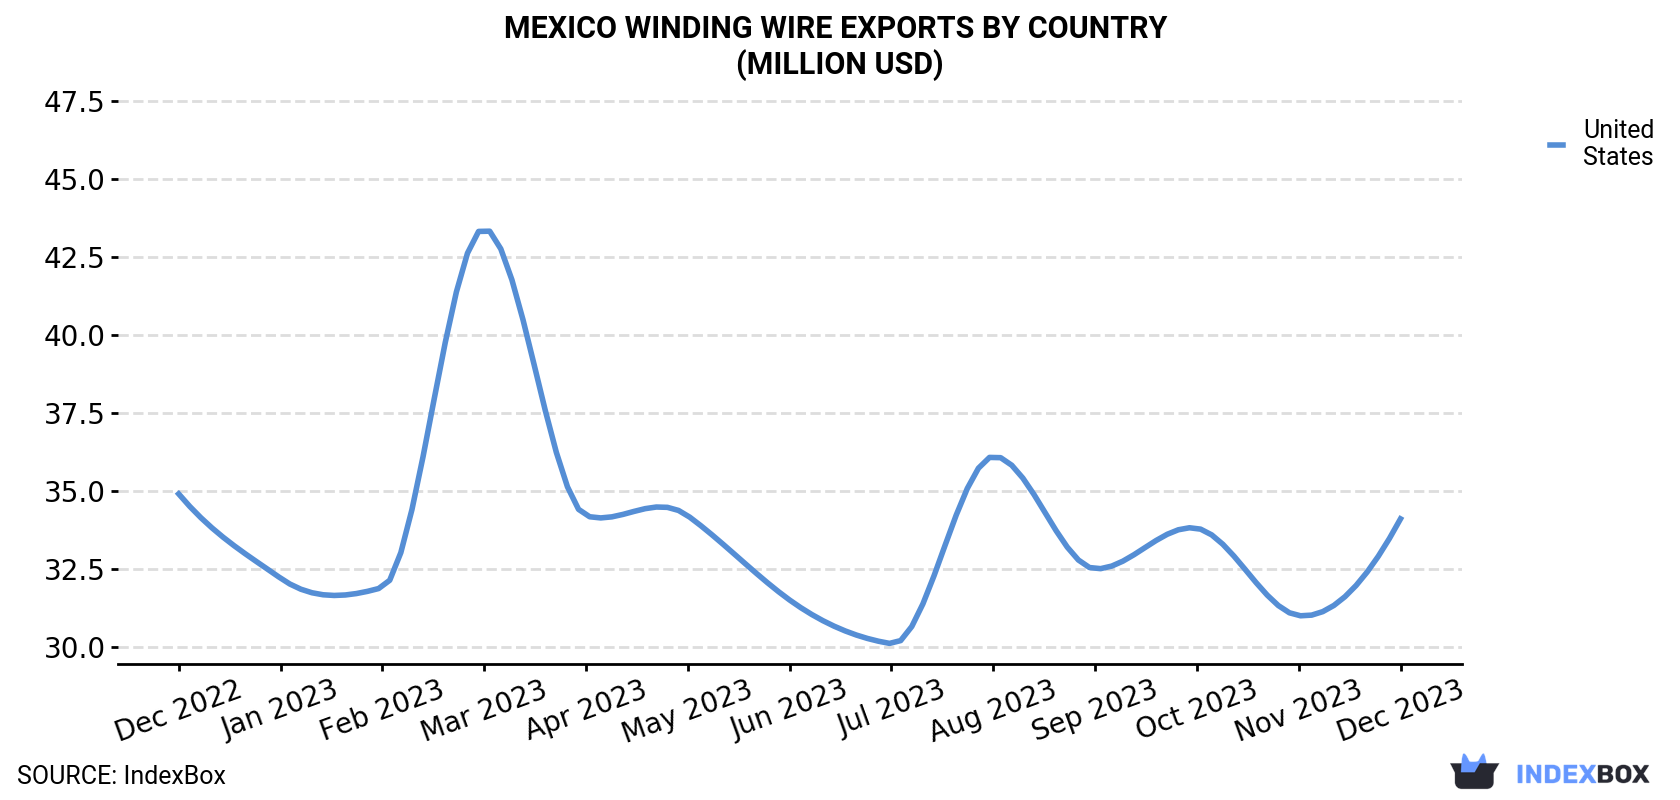 Mexico Winding Wire Exports By Country (Million USD)